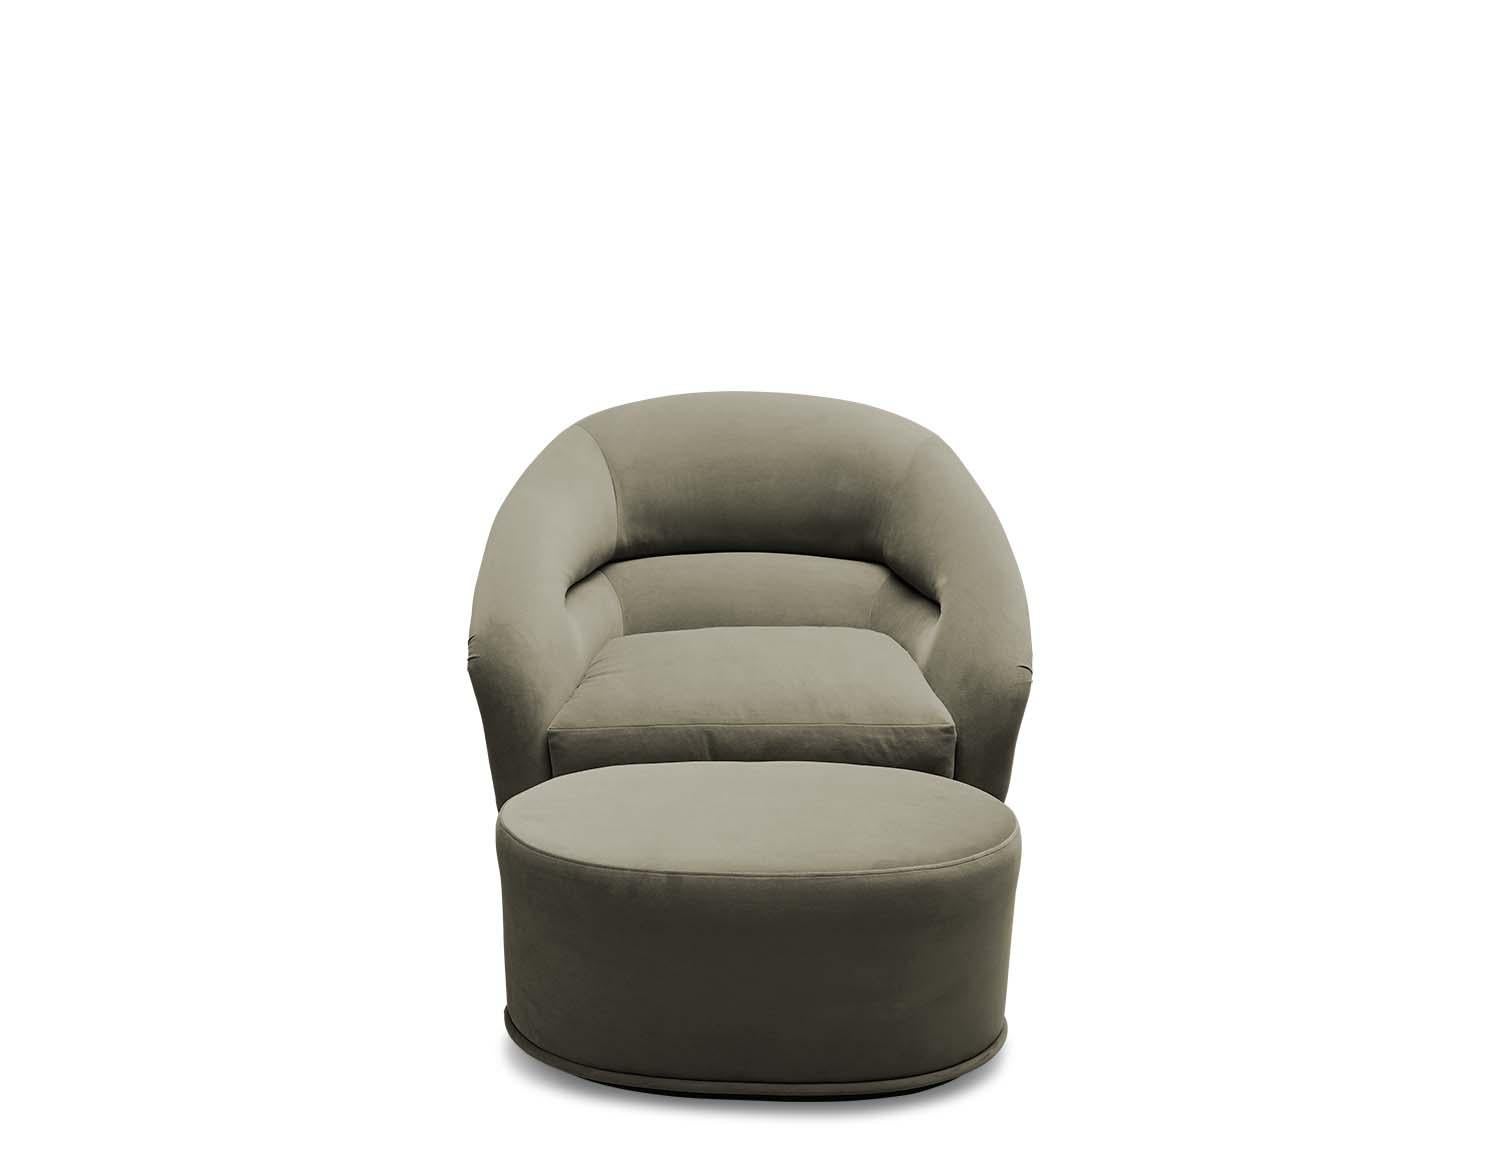 The Huxley swivel chair is inspired by 1970s lounge furniture. A curvaceous form with a single line tuft and long seat cushion rest atop a brass base that swivels.

The Lawson-Fenning Collection is designed and handmade in Los Angeles,